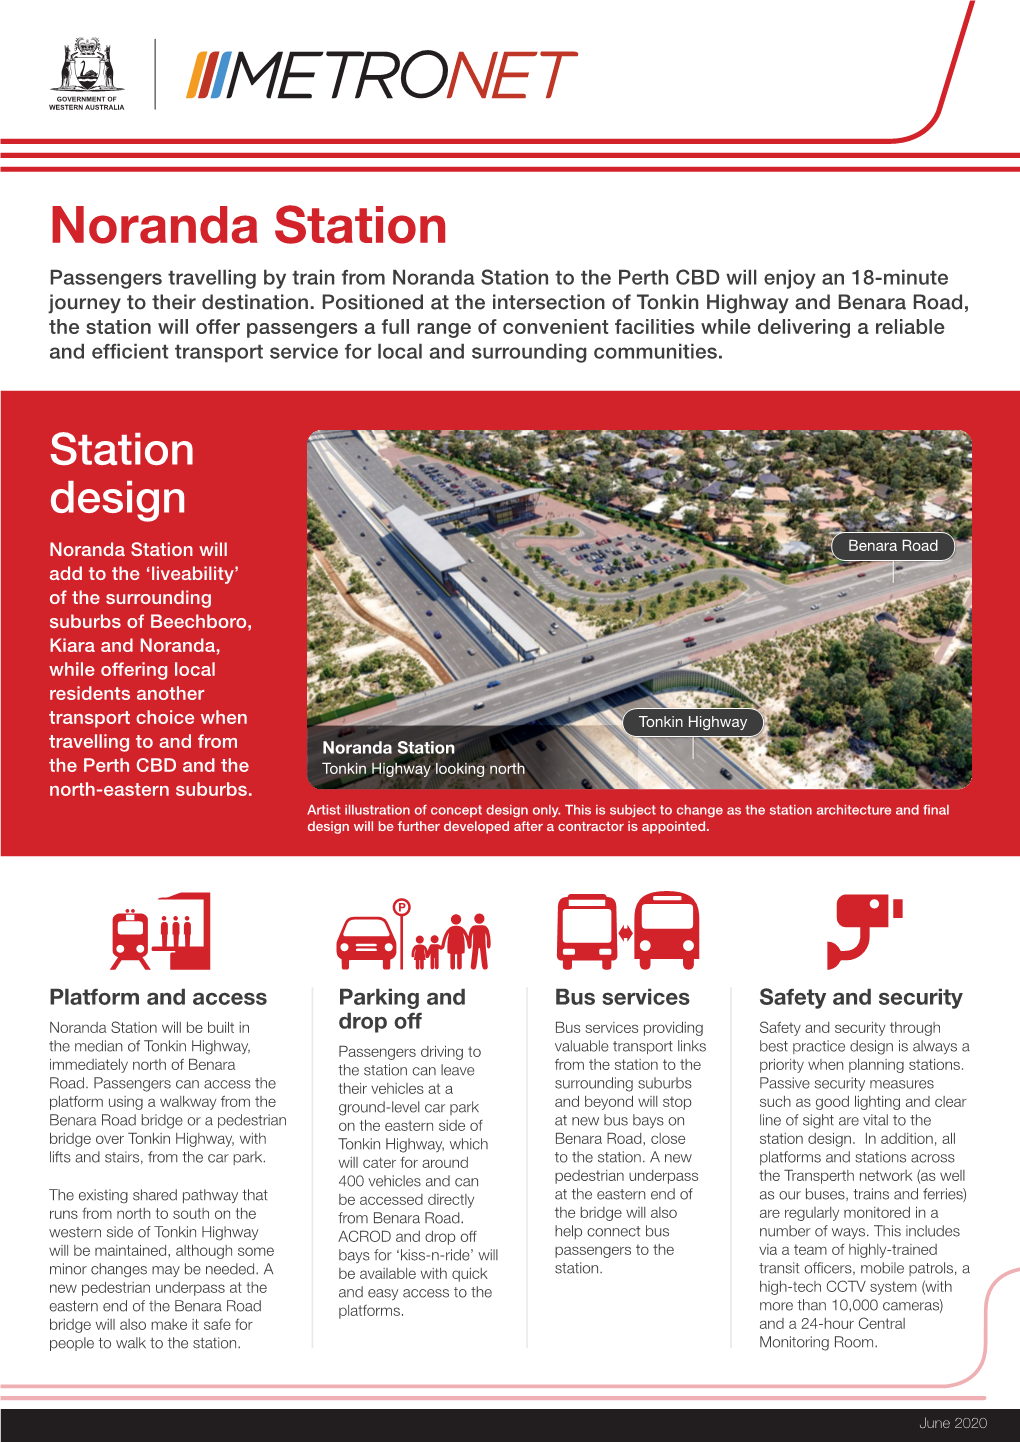 Noranda Station Passengers Travelling by Train from Noranda Station to the Perth CBD Will Enjoy an 18-Minute Journey to Their Destination